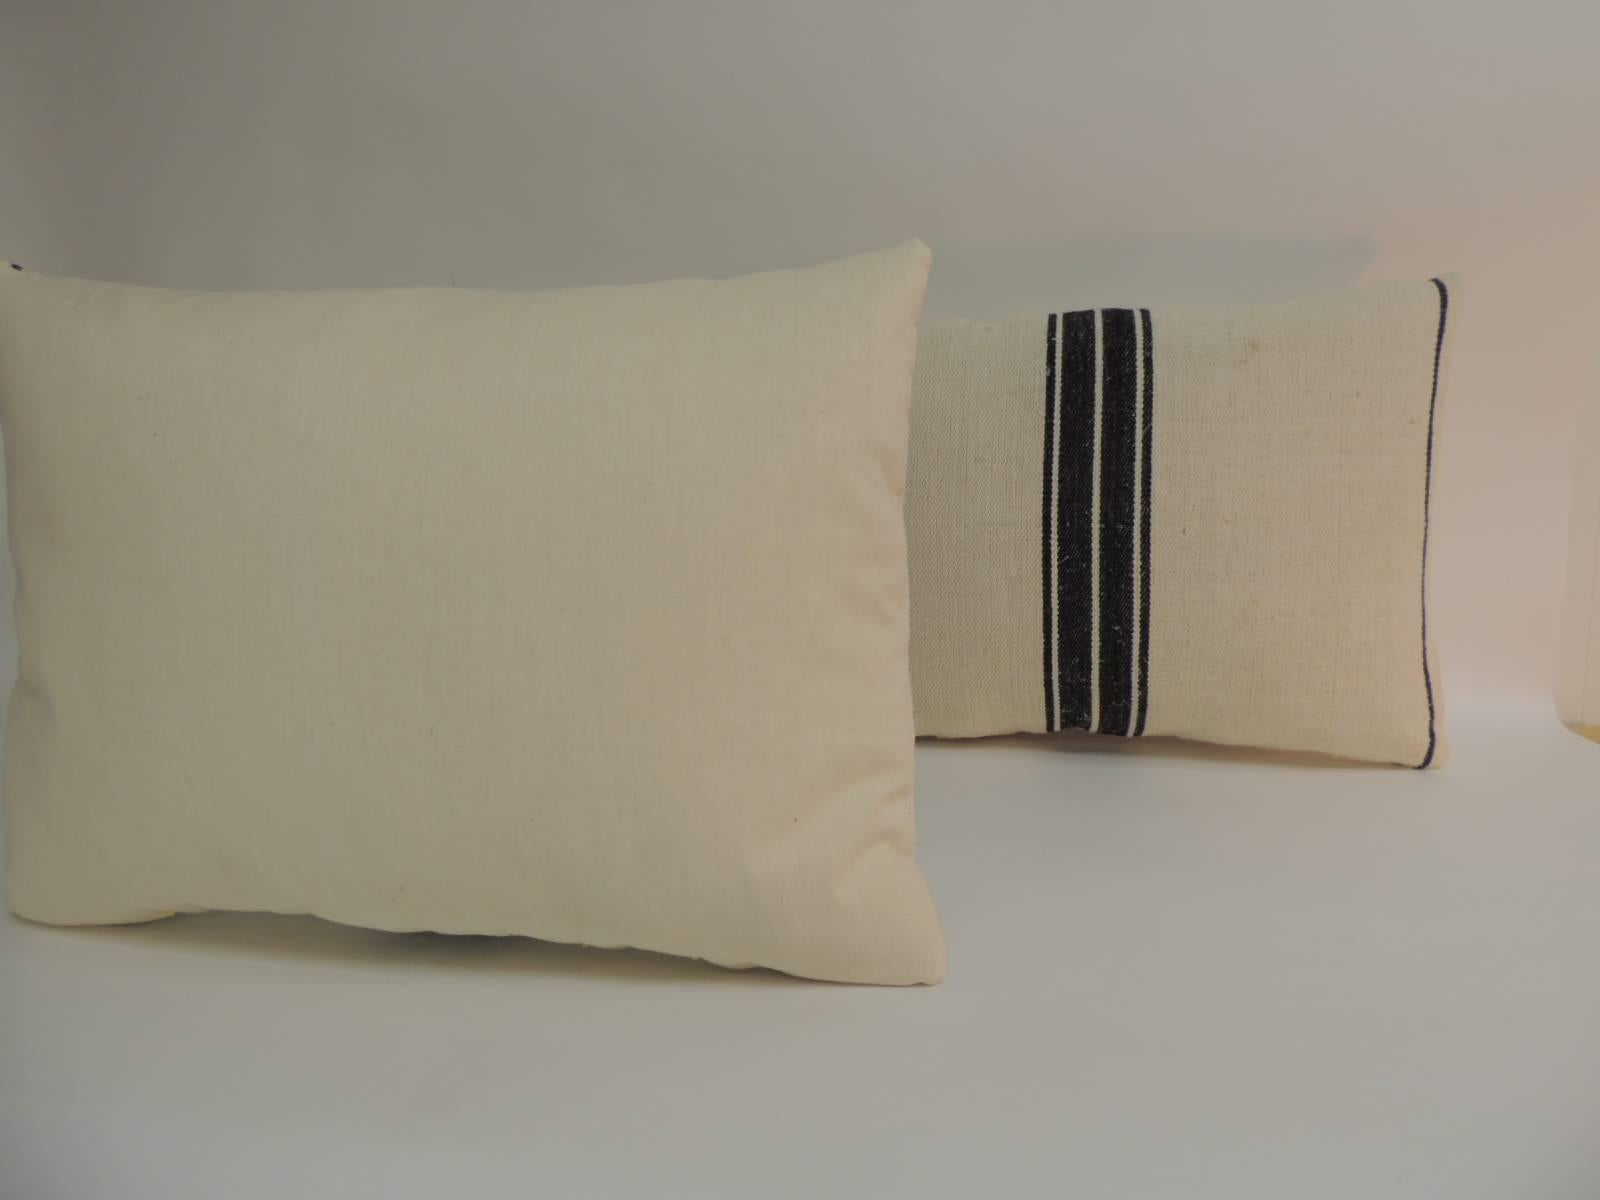 French Provincial Pair of French Black & Natural Woven Grain Sack Stripes Decorative Pillows